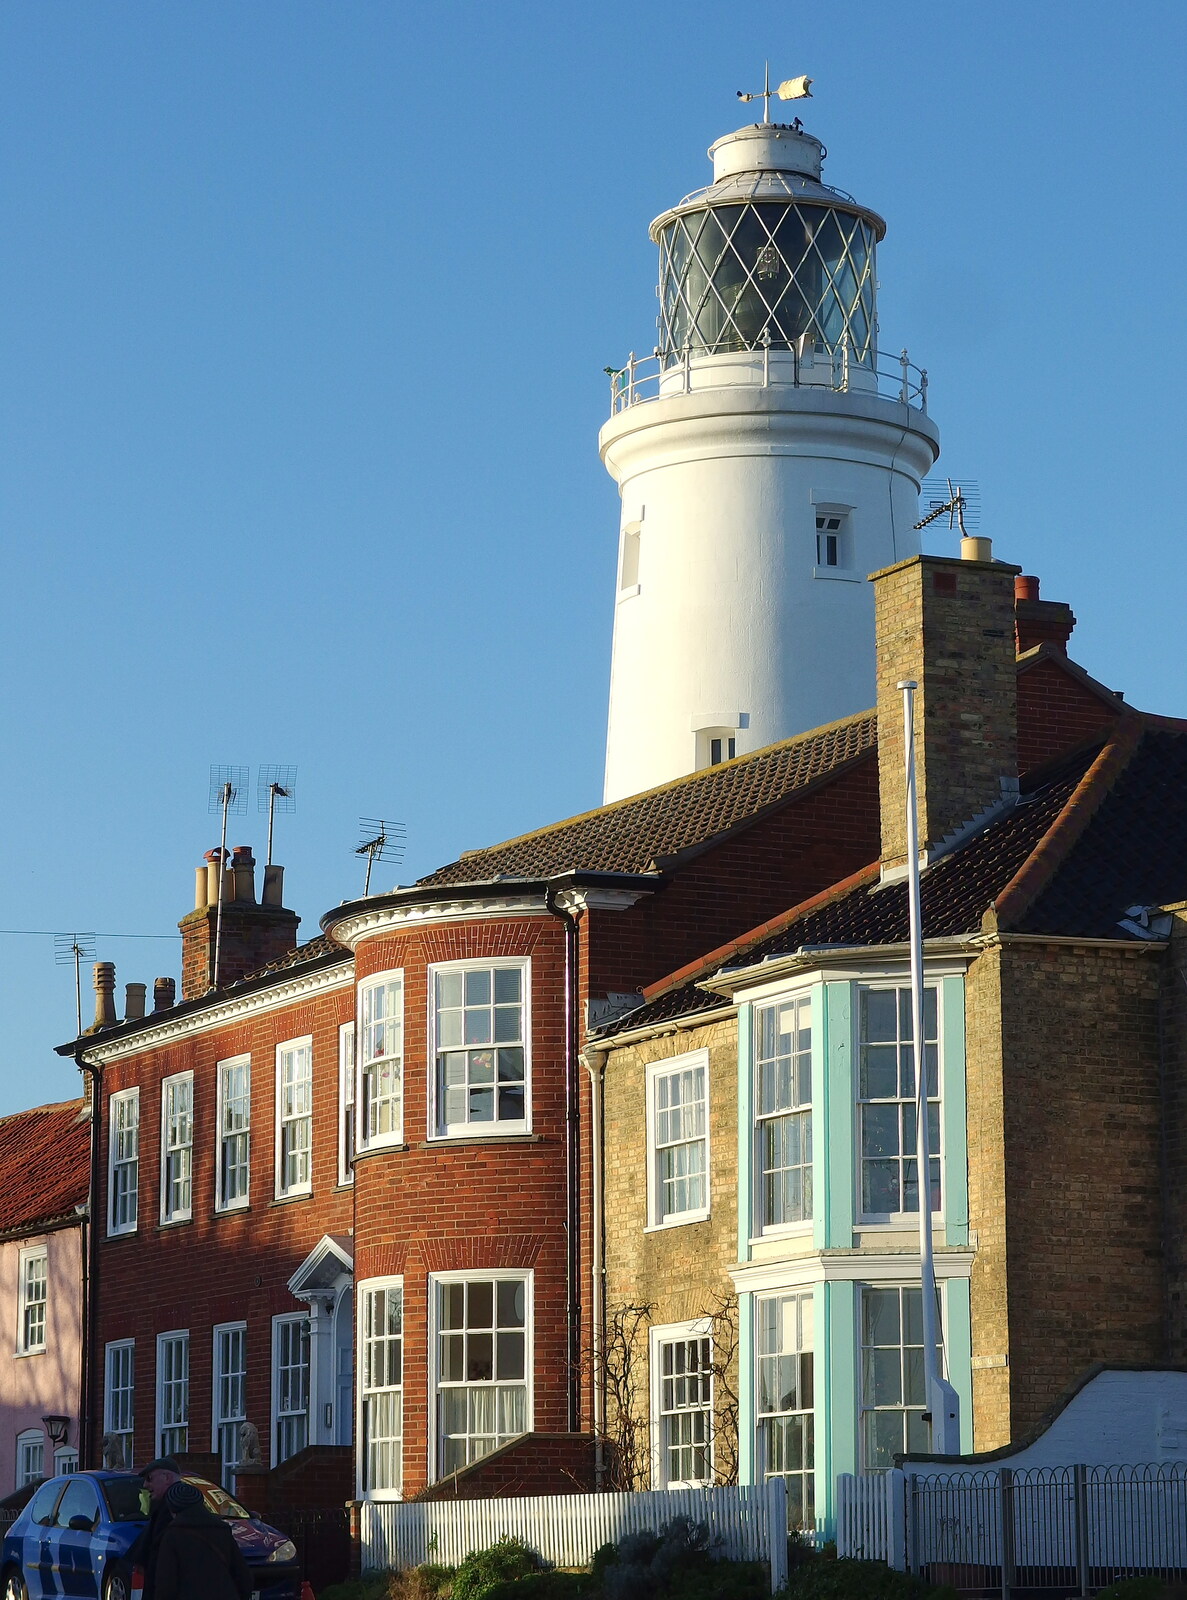 The lighthouse on St. James's Green from Post-Christmas Southwold, Suffolk - 29th December 2013